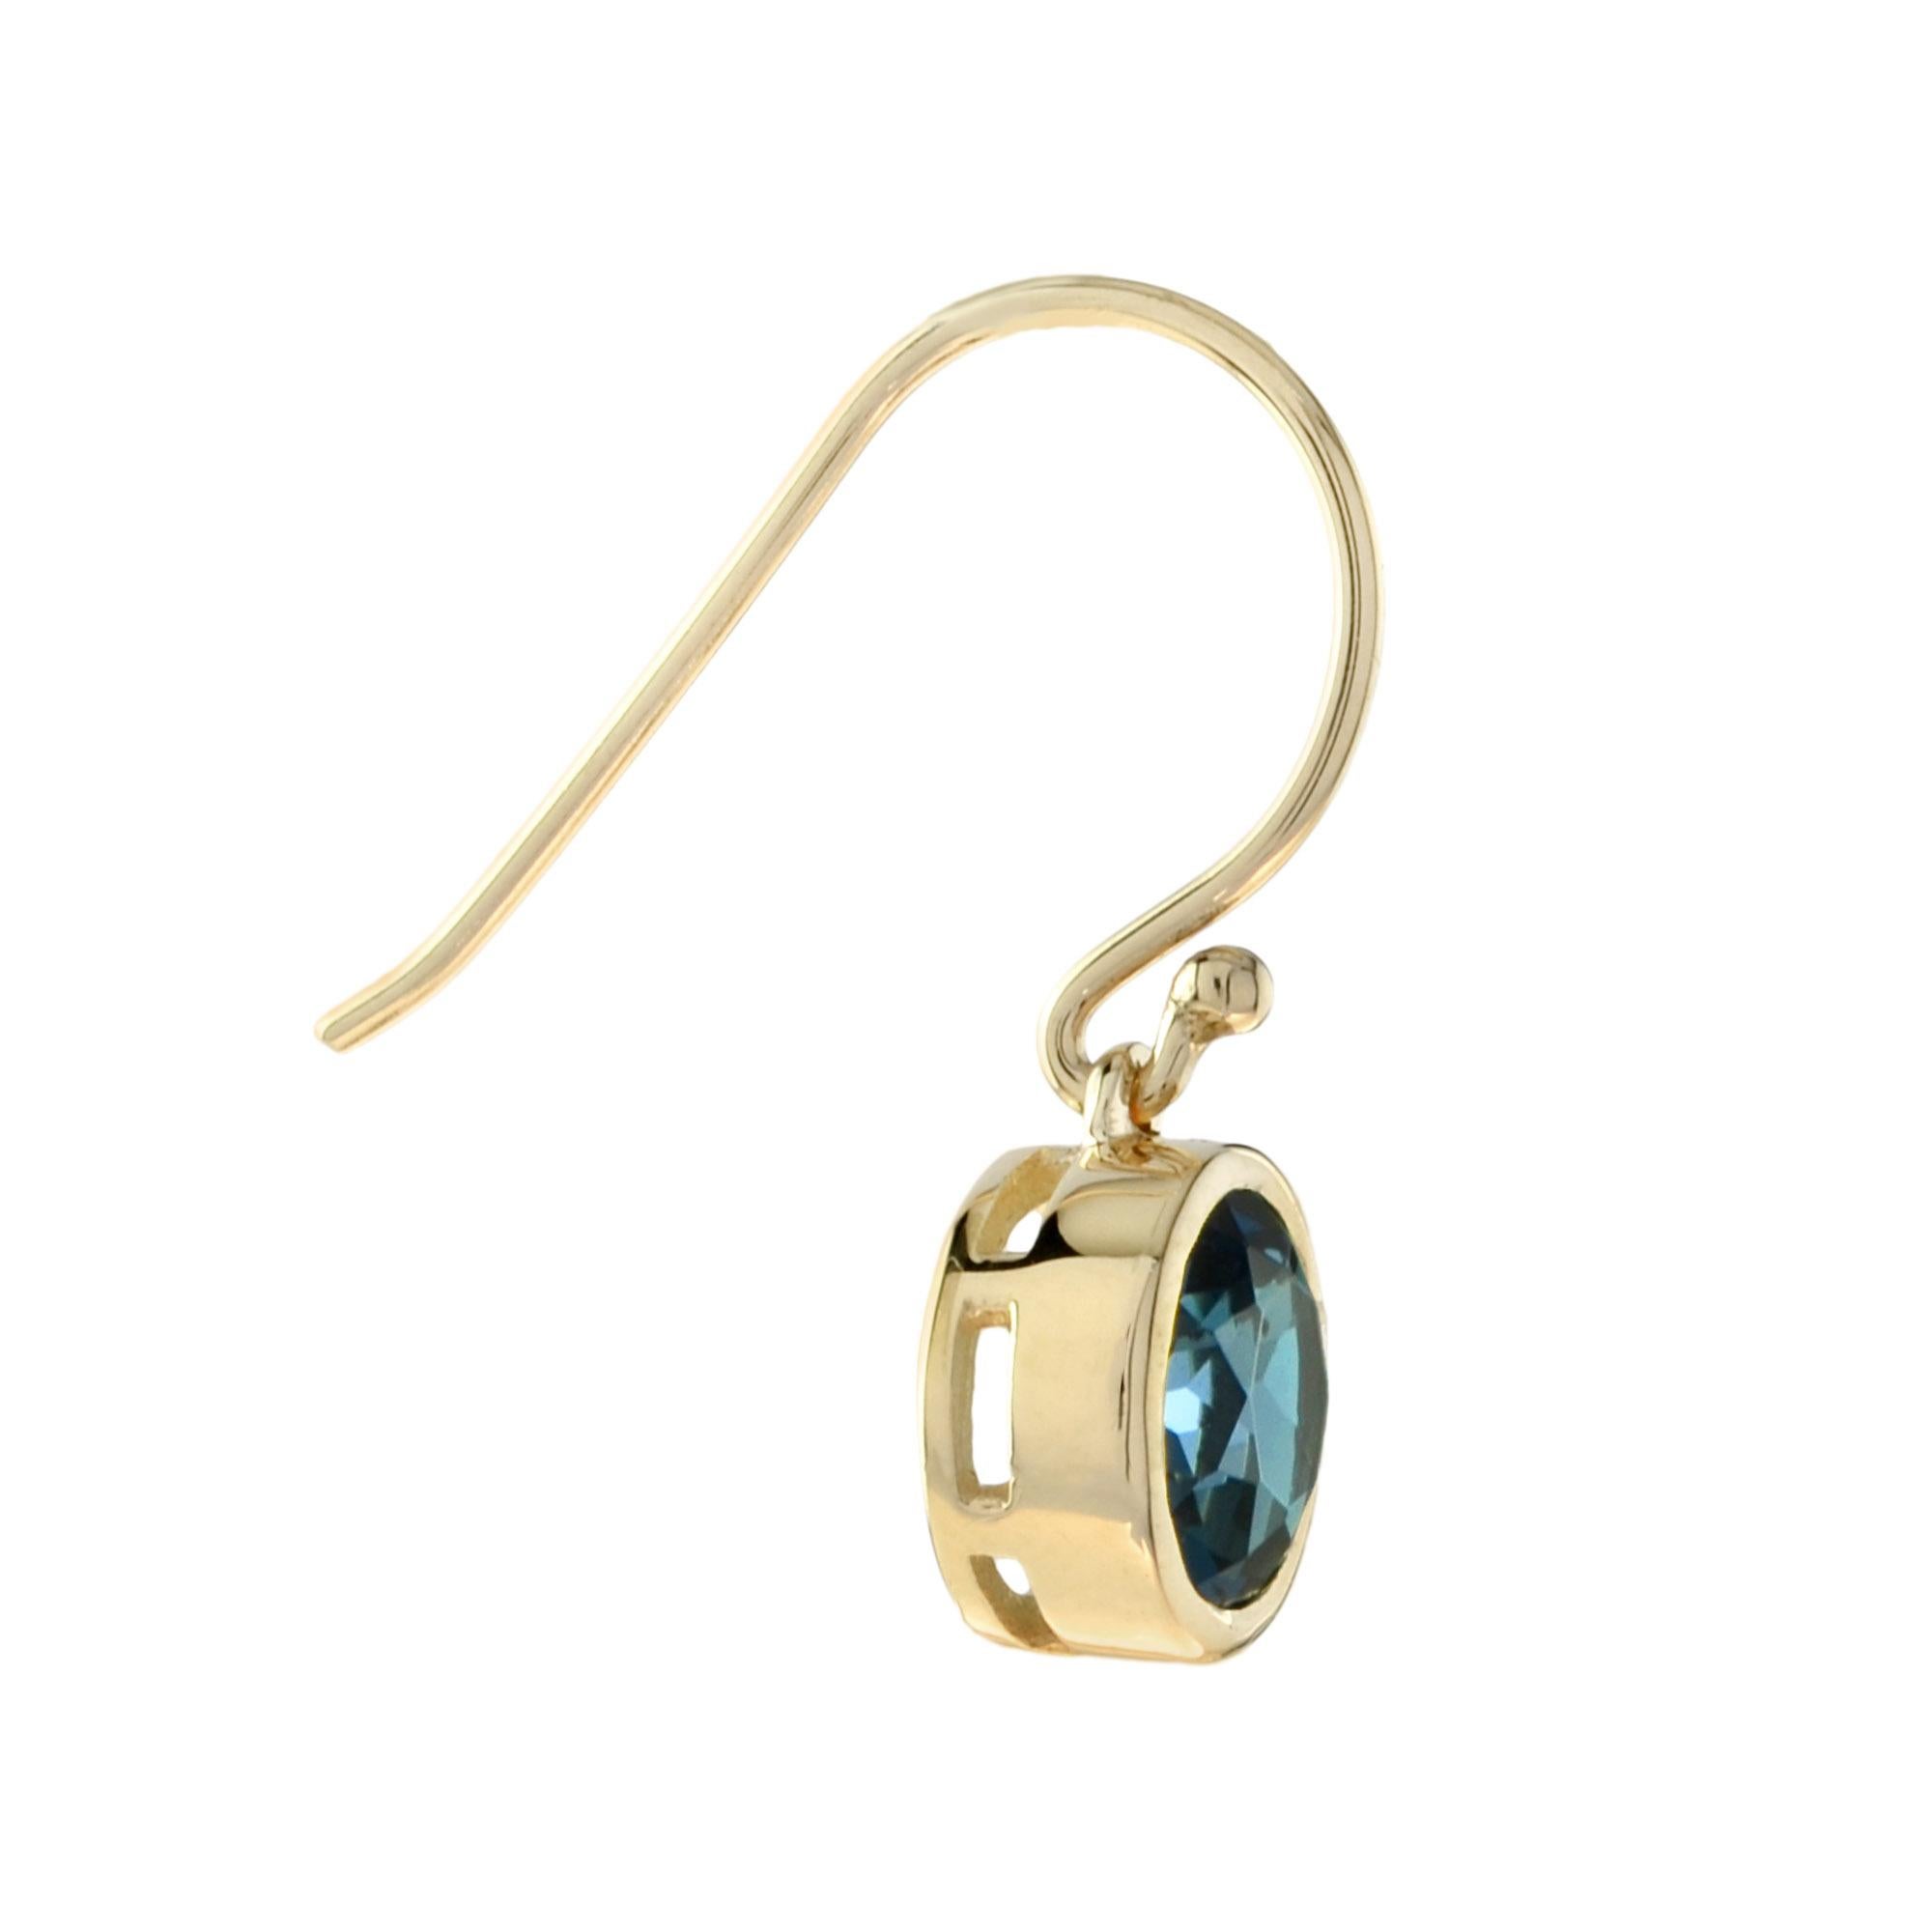 Round Cut One Round London Blue Topaz Drop Earrings in 14K Yellow Gold For Sale